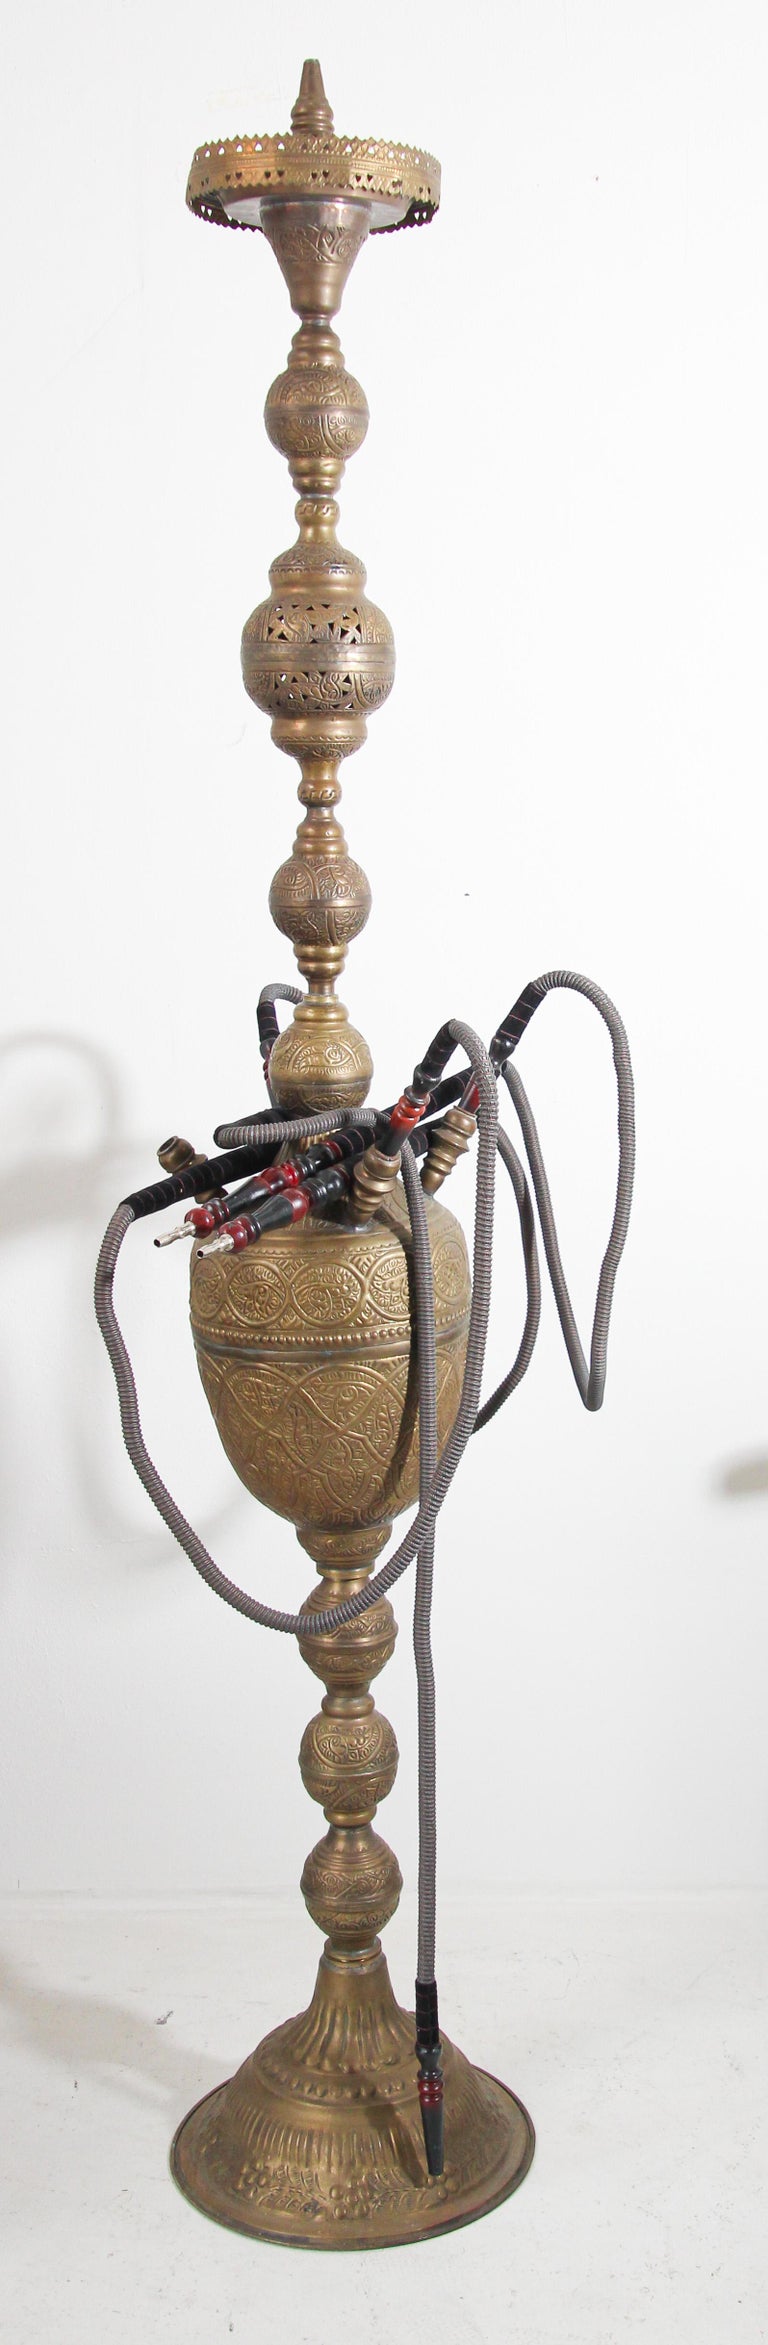 https://a.1stdibscdn.com/huge-massive-middle-eastern-arabian-brass-hookah-pipe-for-sale-picture-17/f_9068/f_255141721637251407307/Middle_Eastern_Collectible_vintage_Hookha_brass_floor_water_pipe_Mughal_India_3_master.jpg?width=768